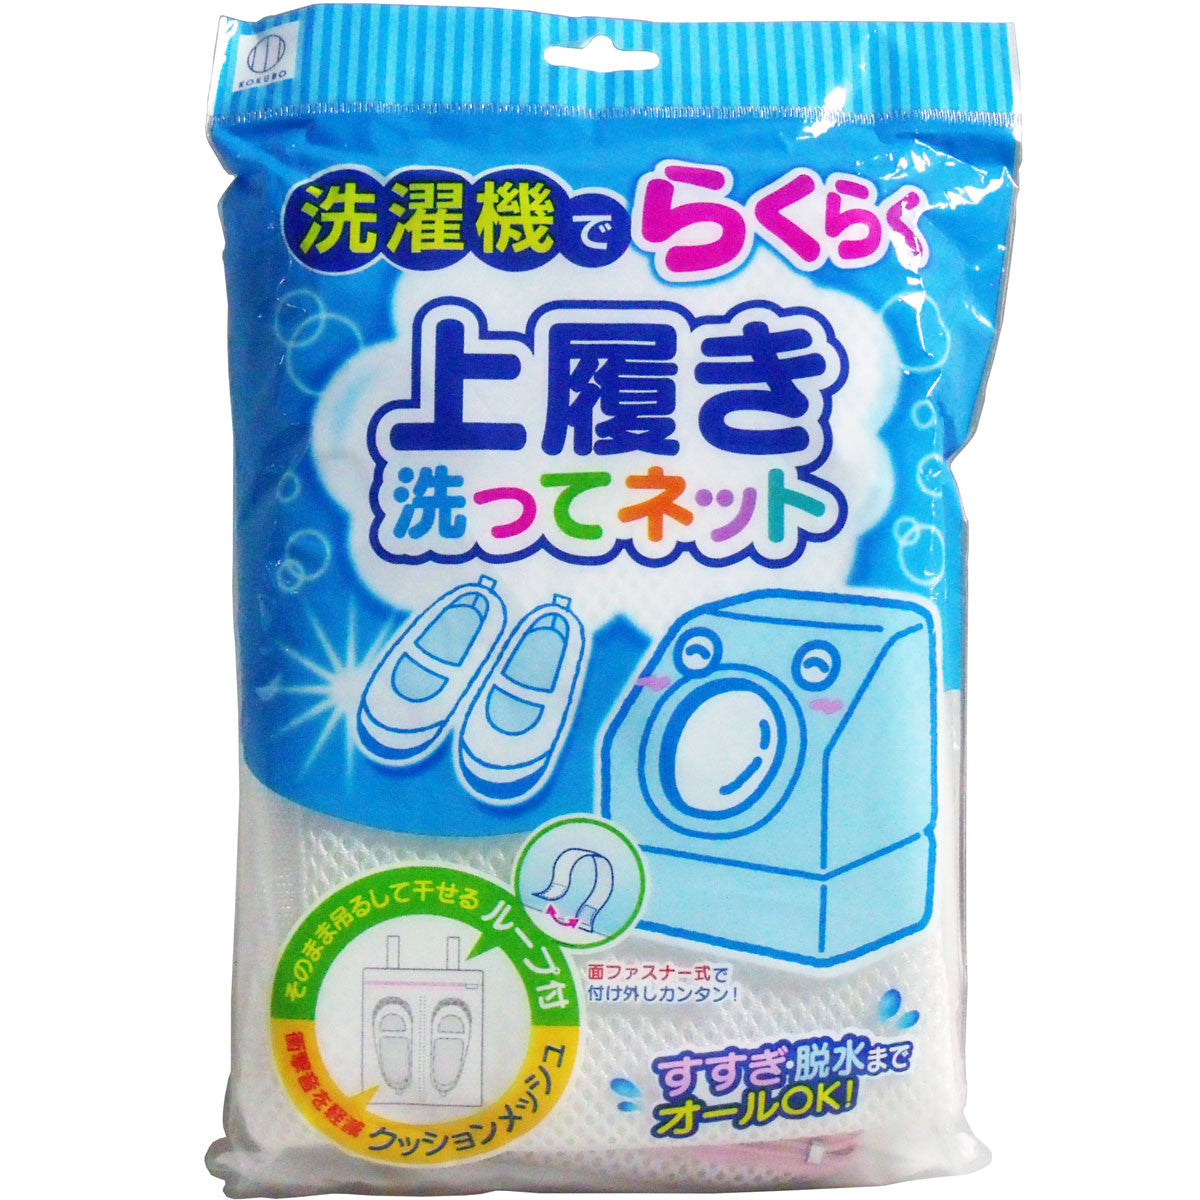 Kokubo Industries - Laundry Bag for Shoes